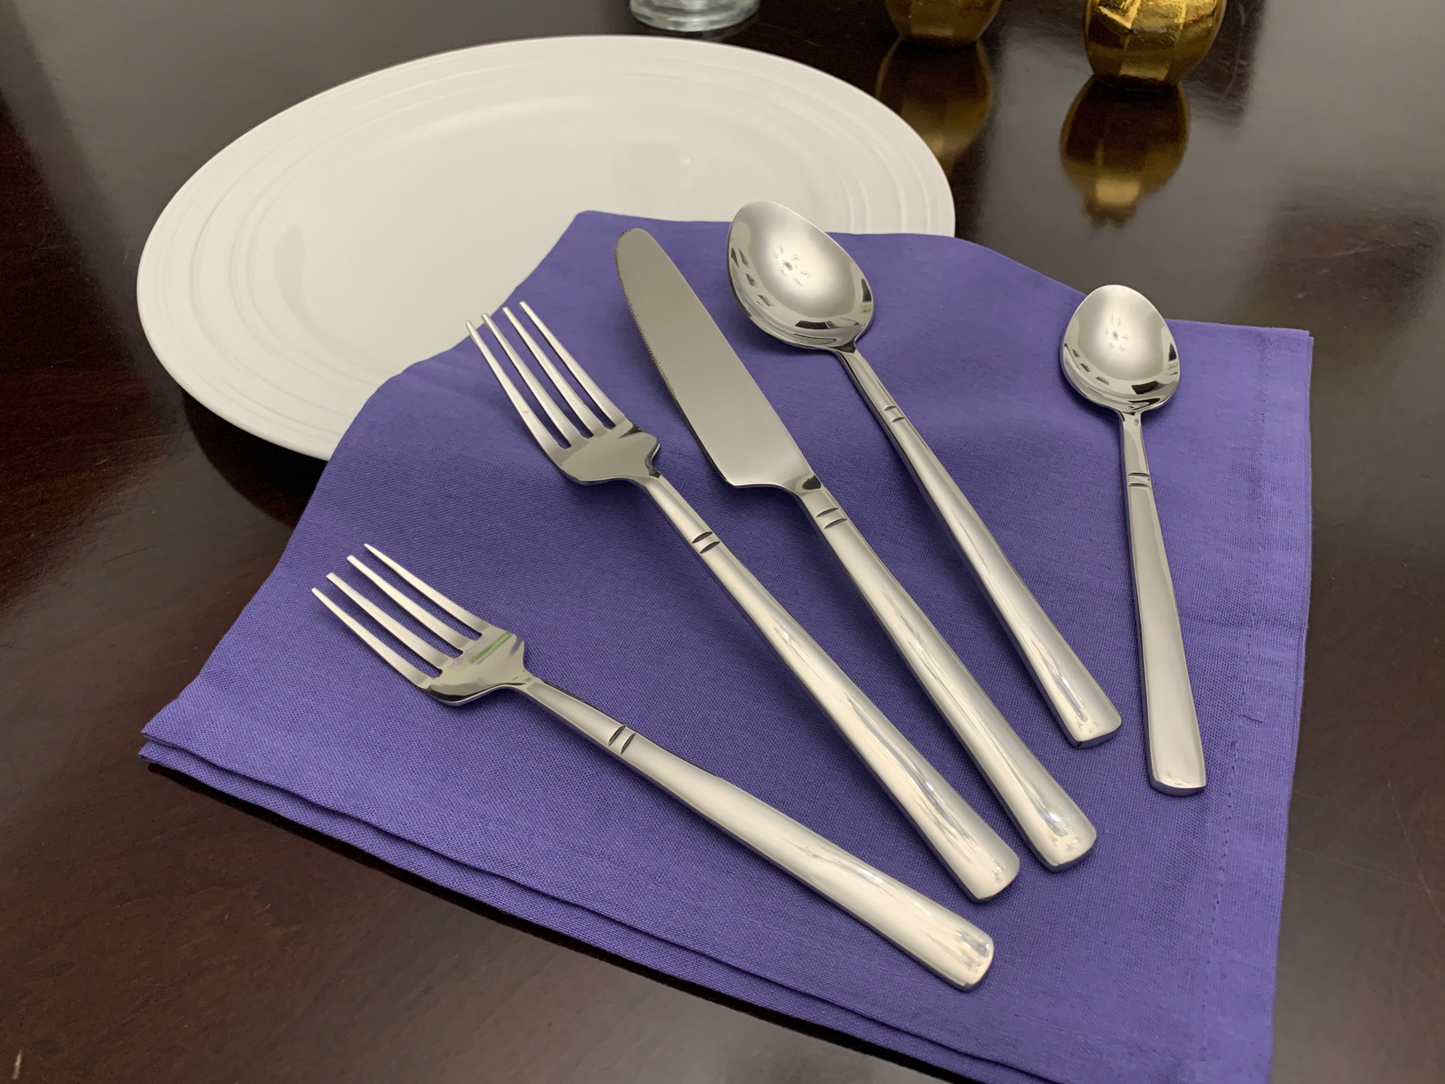 Modern Flatware set of 20 Pieces Silver Stainless Steel